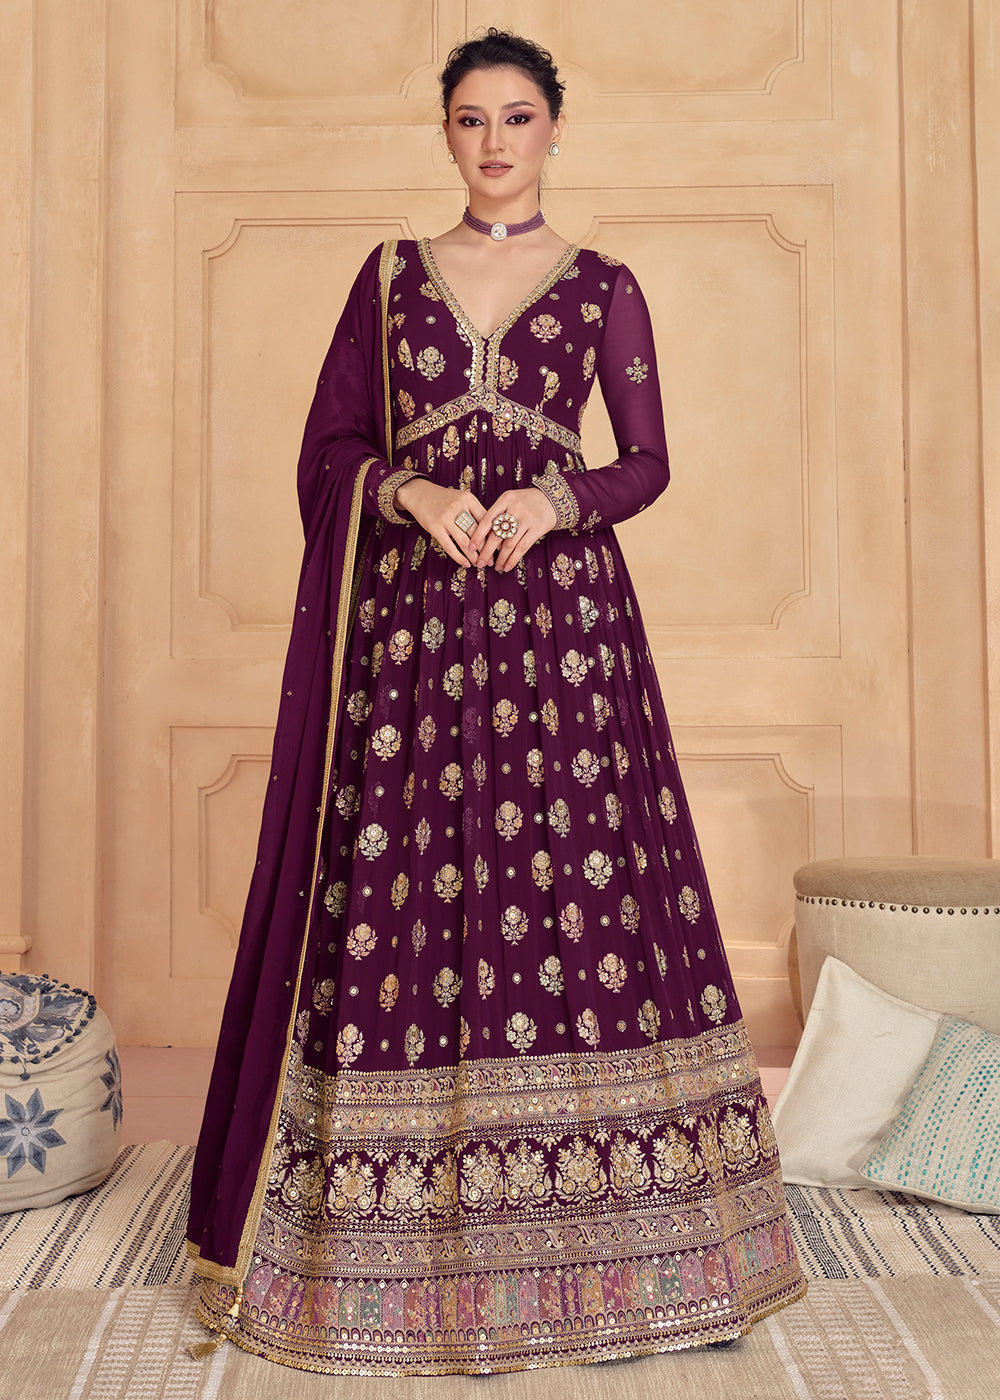 Buy Now Wine Purple Real Georgette Embroidered Long Anarkali Gown Online in USA, UK, Australia, Canada & Worldwide at Empress Clothing.